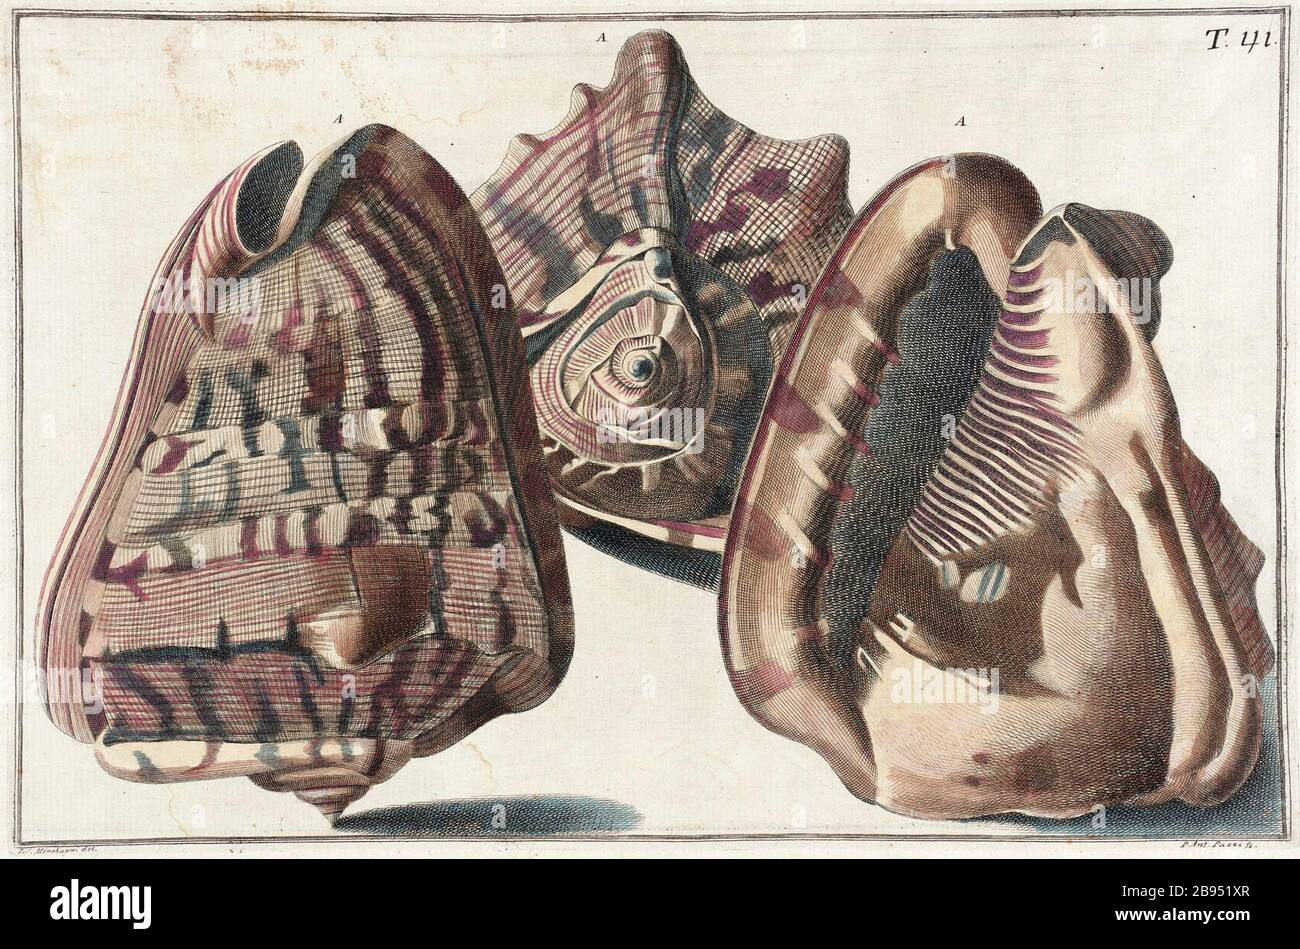 'Three Shells; English:  Italy, 18th century Prints; engravings Engraving with hand coloring Sheet: 12 x 17 7/8 in. (30.48 x 45.4 cm); image: 9 7/16 x 14 1/8 in. (23.97 x 35.88 cm) Mary Stansbury Ruiz Bequest (M.88.91.439) Prints and Drawings; 18th century date QS:P571,+1750-00-00T00:00:00Z/7; ' Stock Photo